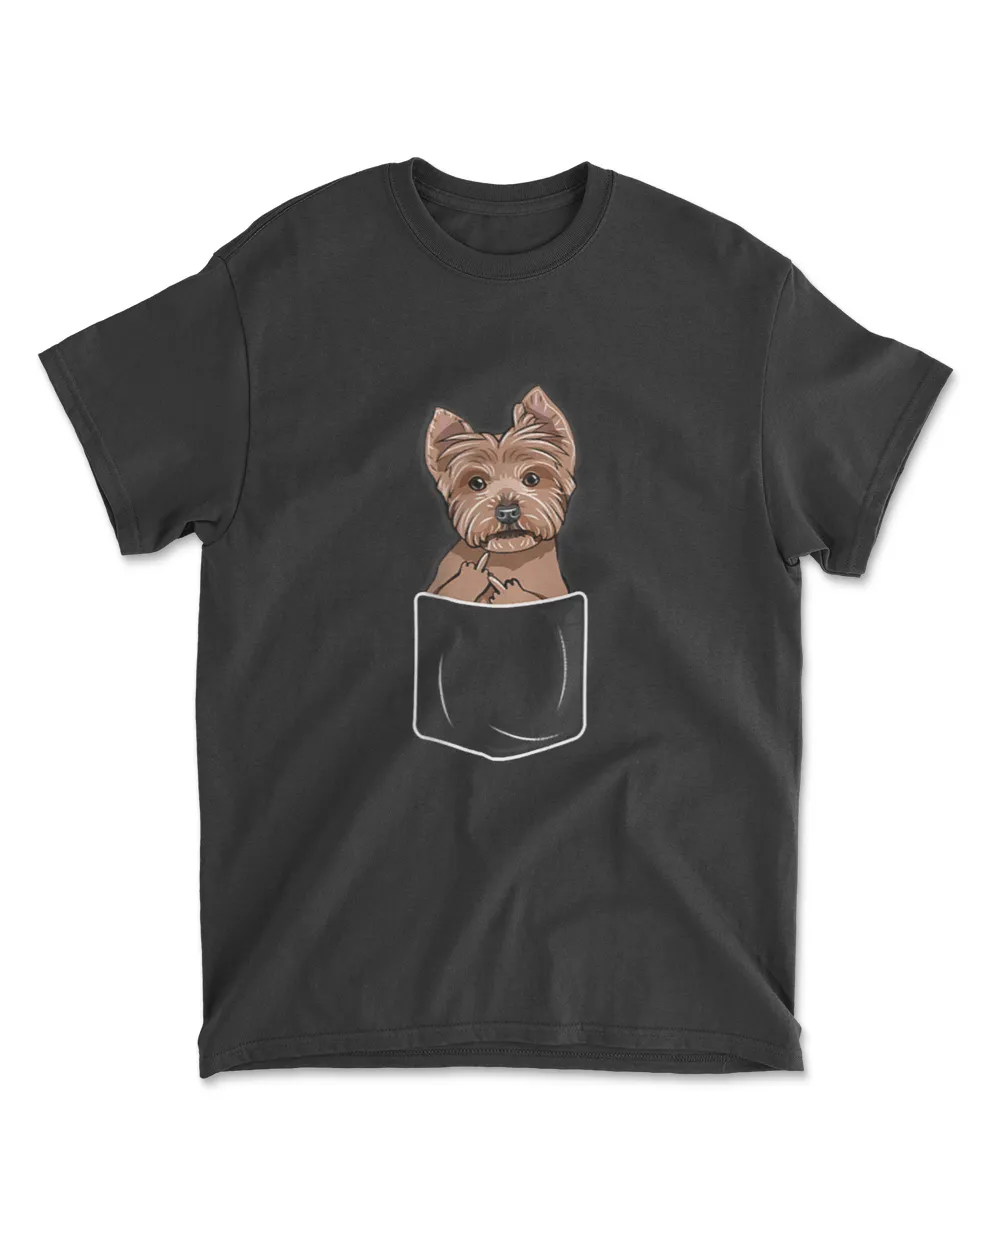 Middle Finger Yorkshire Terrier Puppy in a Pocket